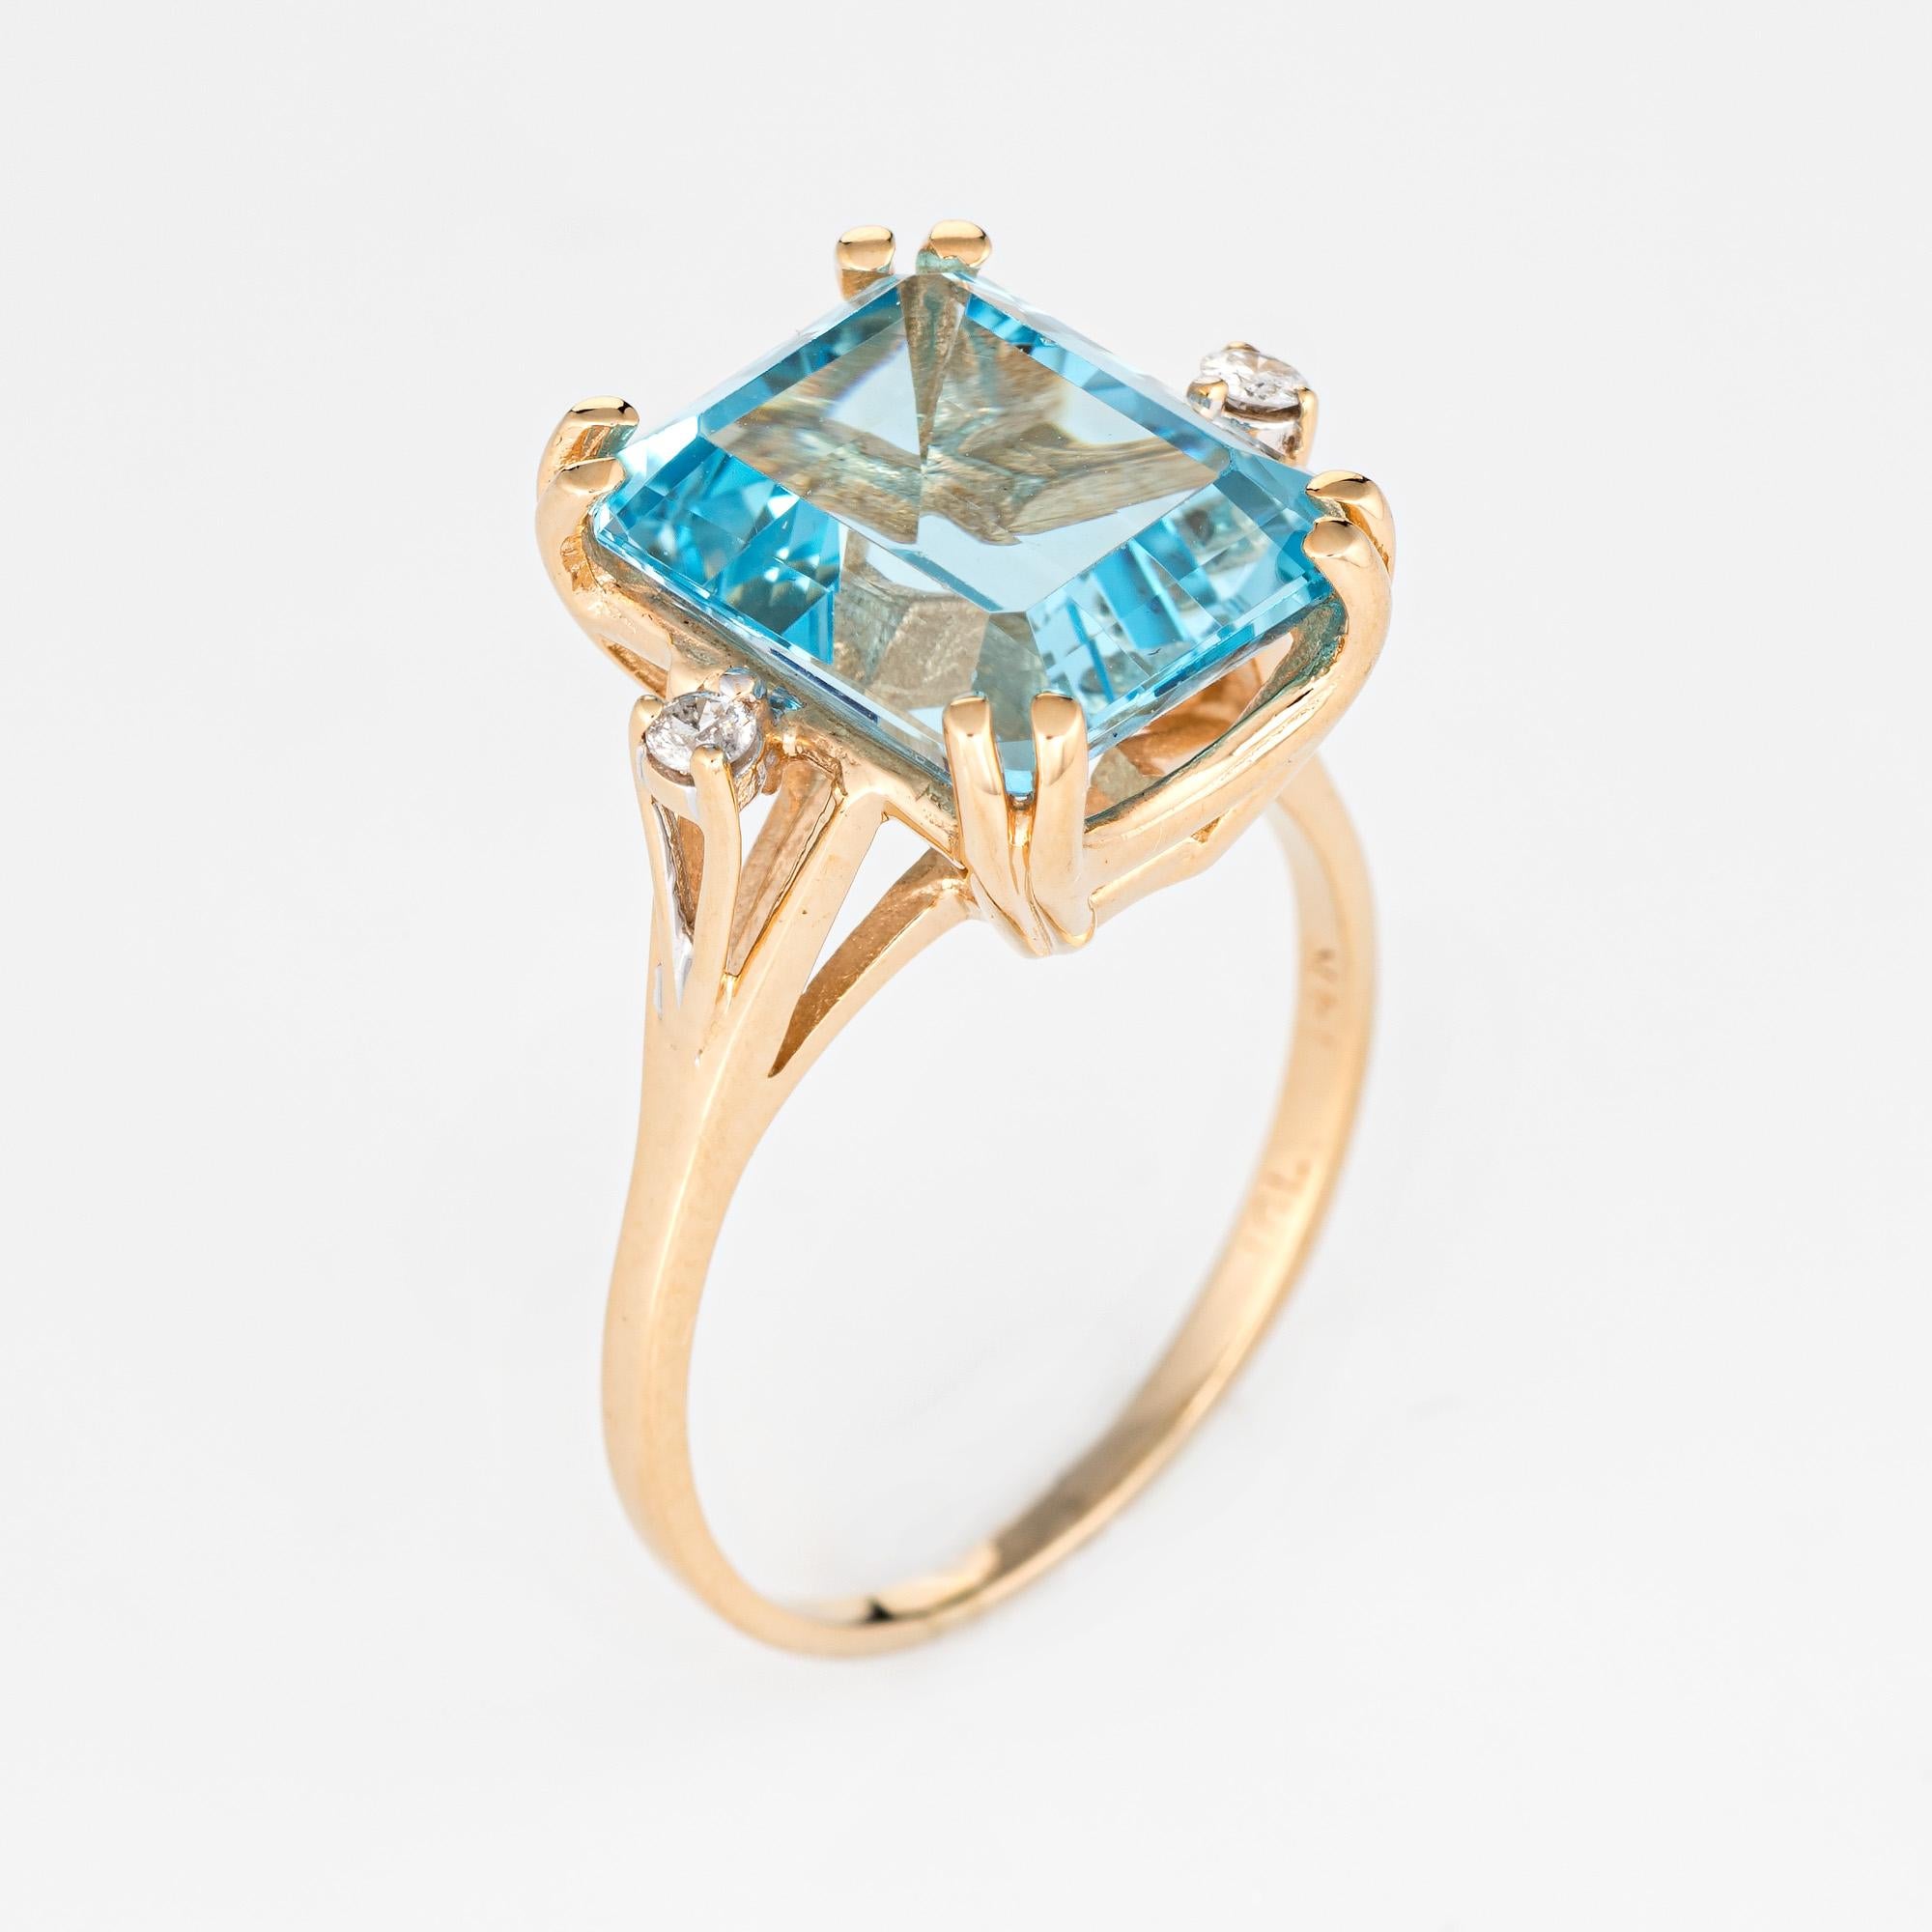 Stylish vintage blue topaz & diamond cocktail ring (circa 1980s to 1990s) crafted in 14 karat yellow gold. 

Emerald cut blue topaz measures 12mm x 10mm (estimated at 9 carats) is accented with an estimated 0.02 carats of diamonds (estimated at H-I